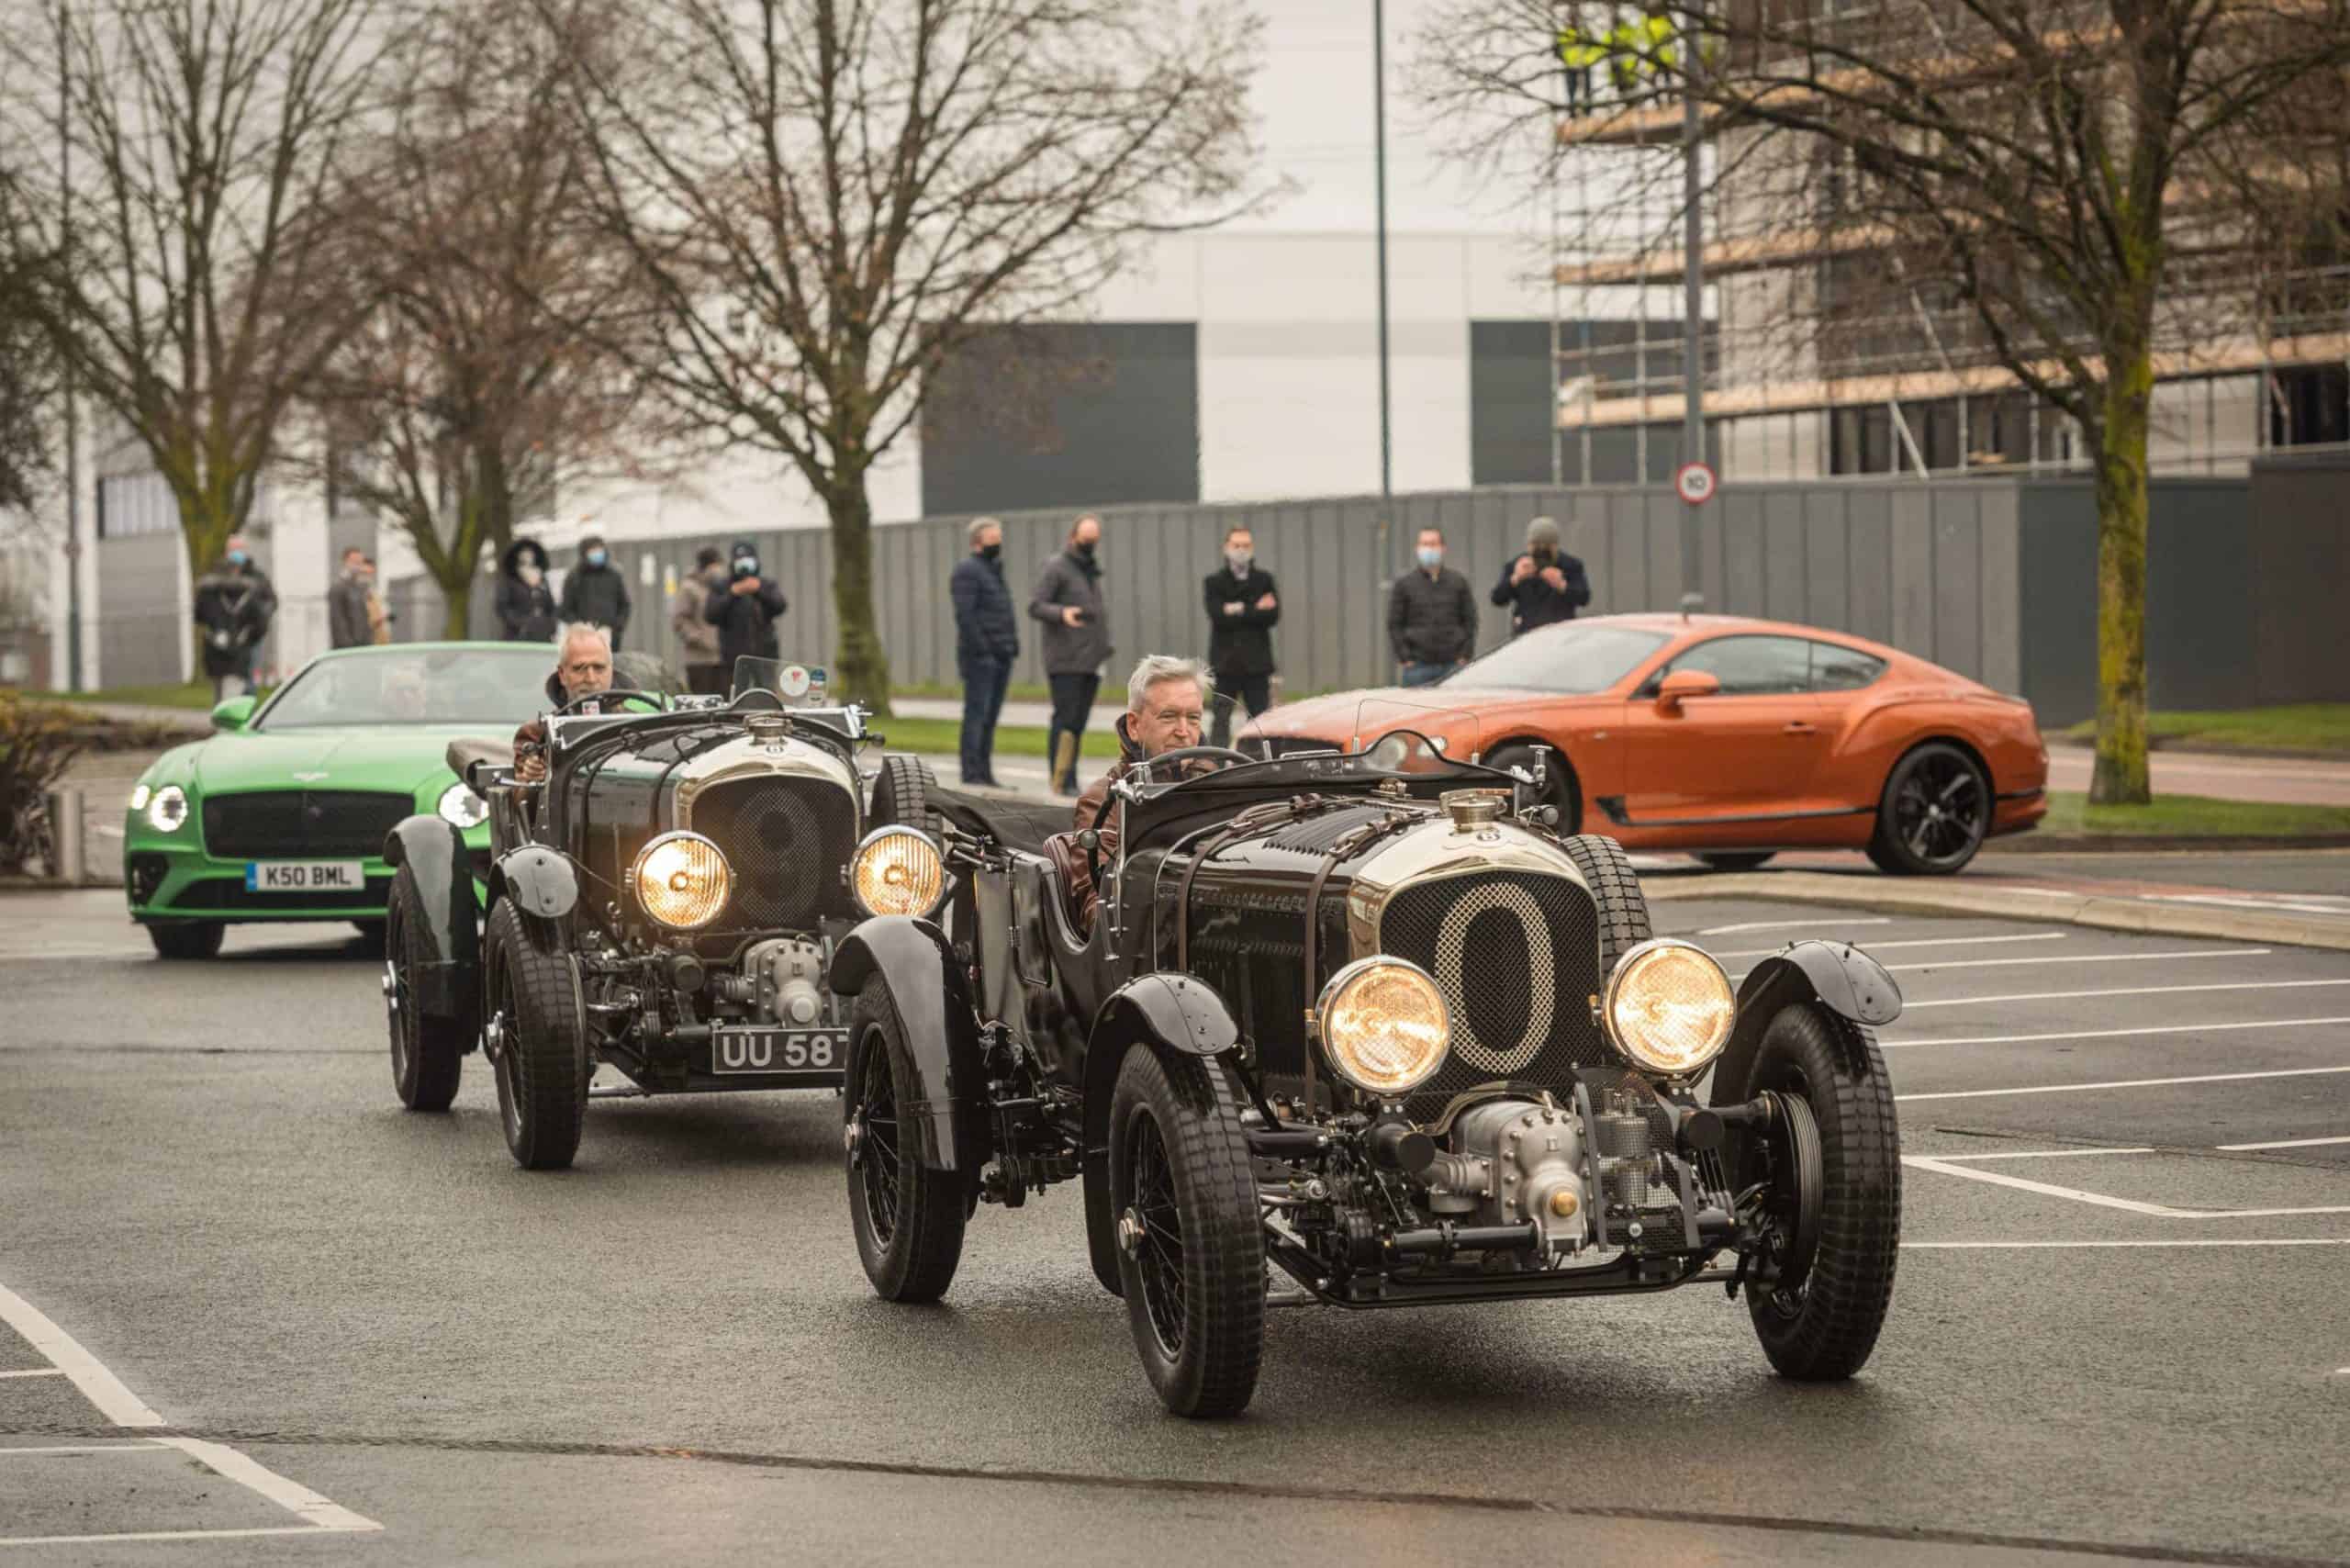 Bentley Motors celebrates the official opening of their new campus